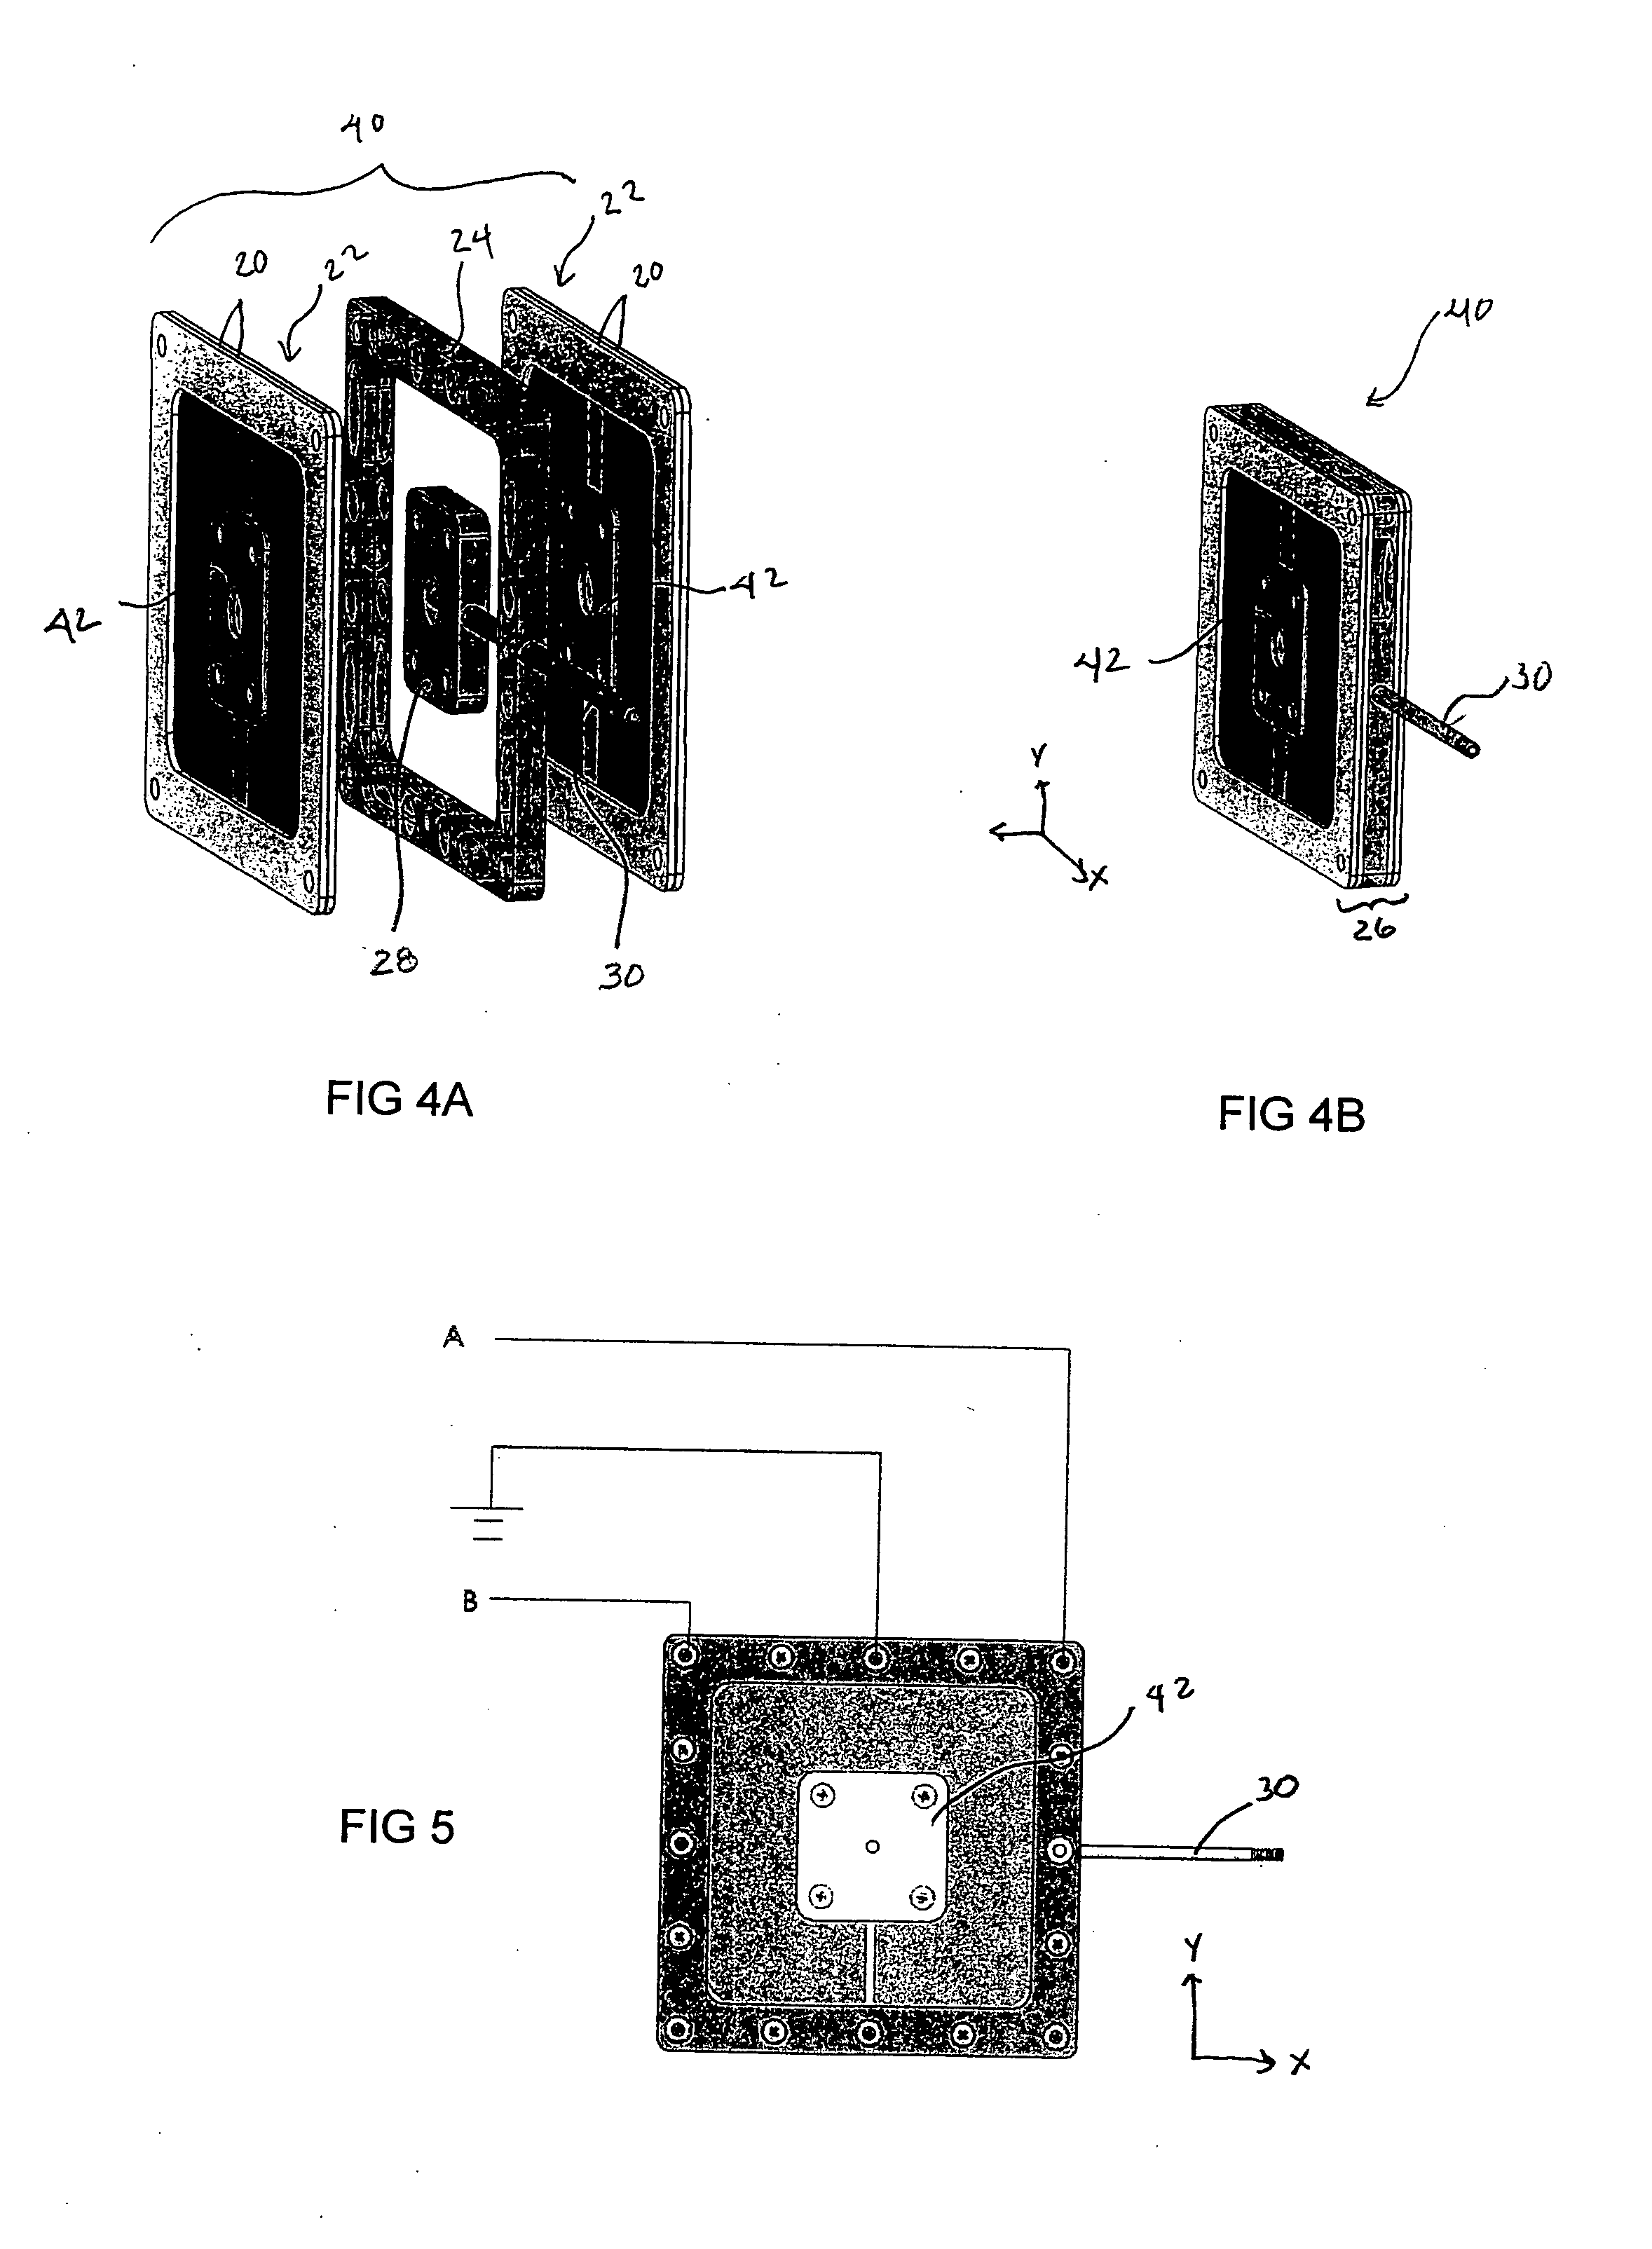 Three-dimensional electroactive polymer actuated devices